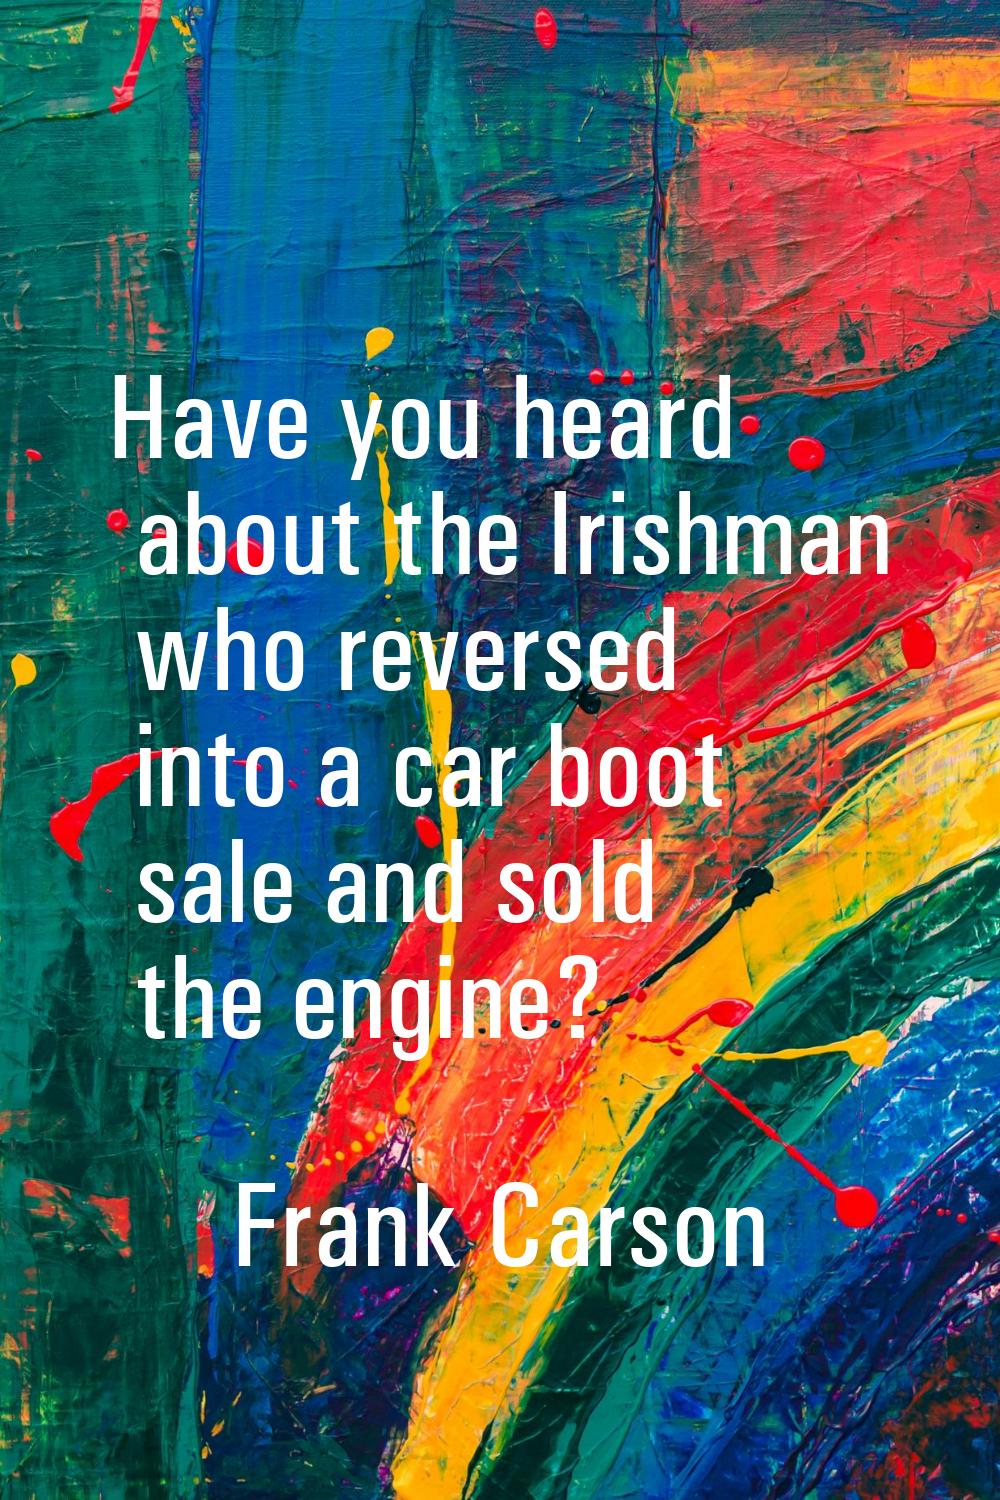 Have you heard about the Irishman who reversed into a car boot sale and sold the engine?